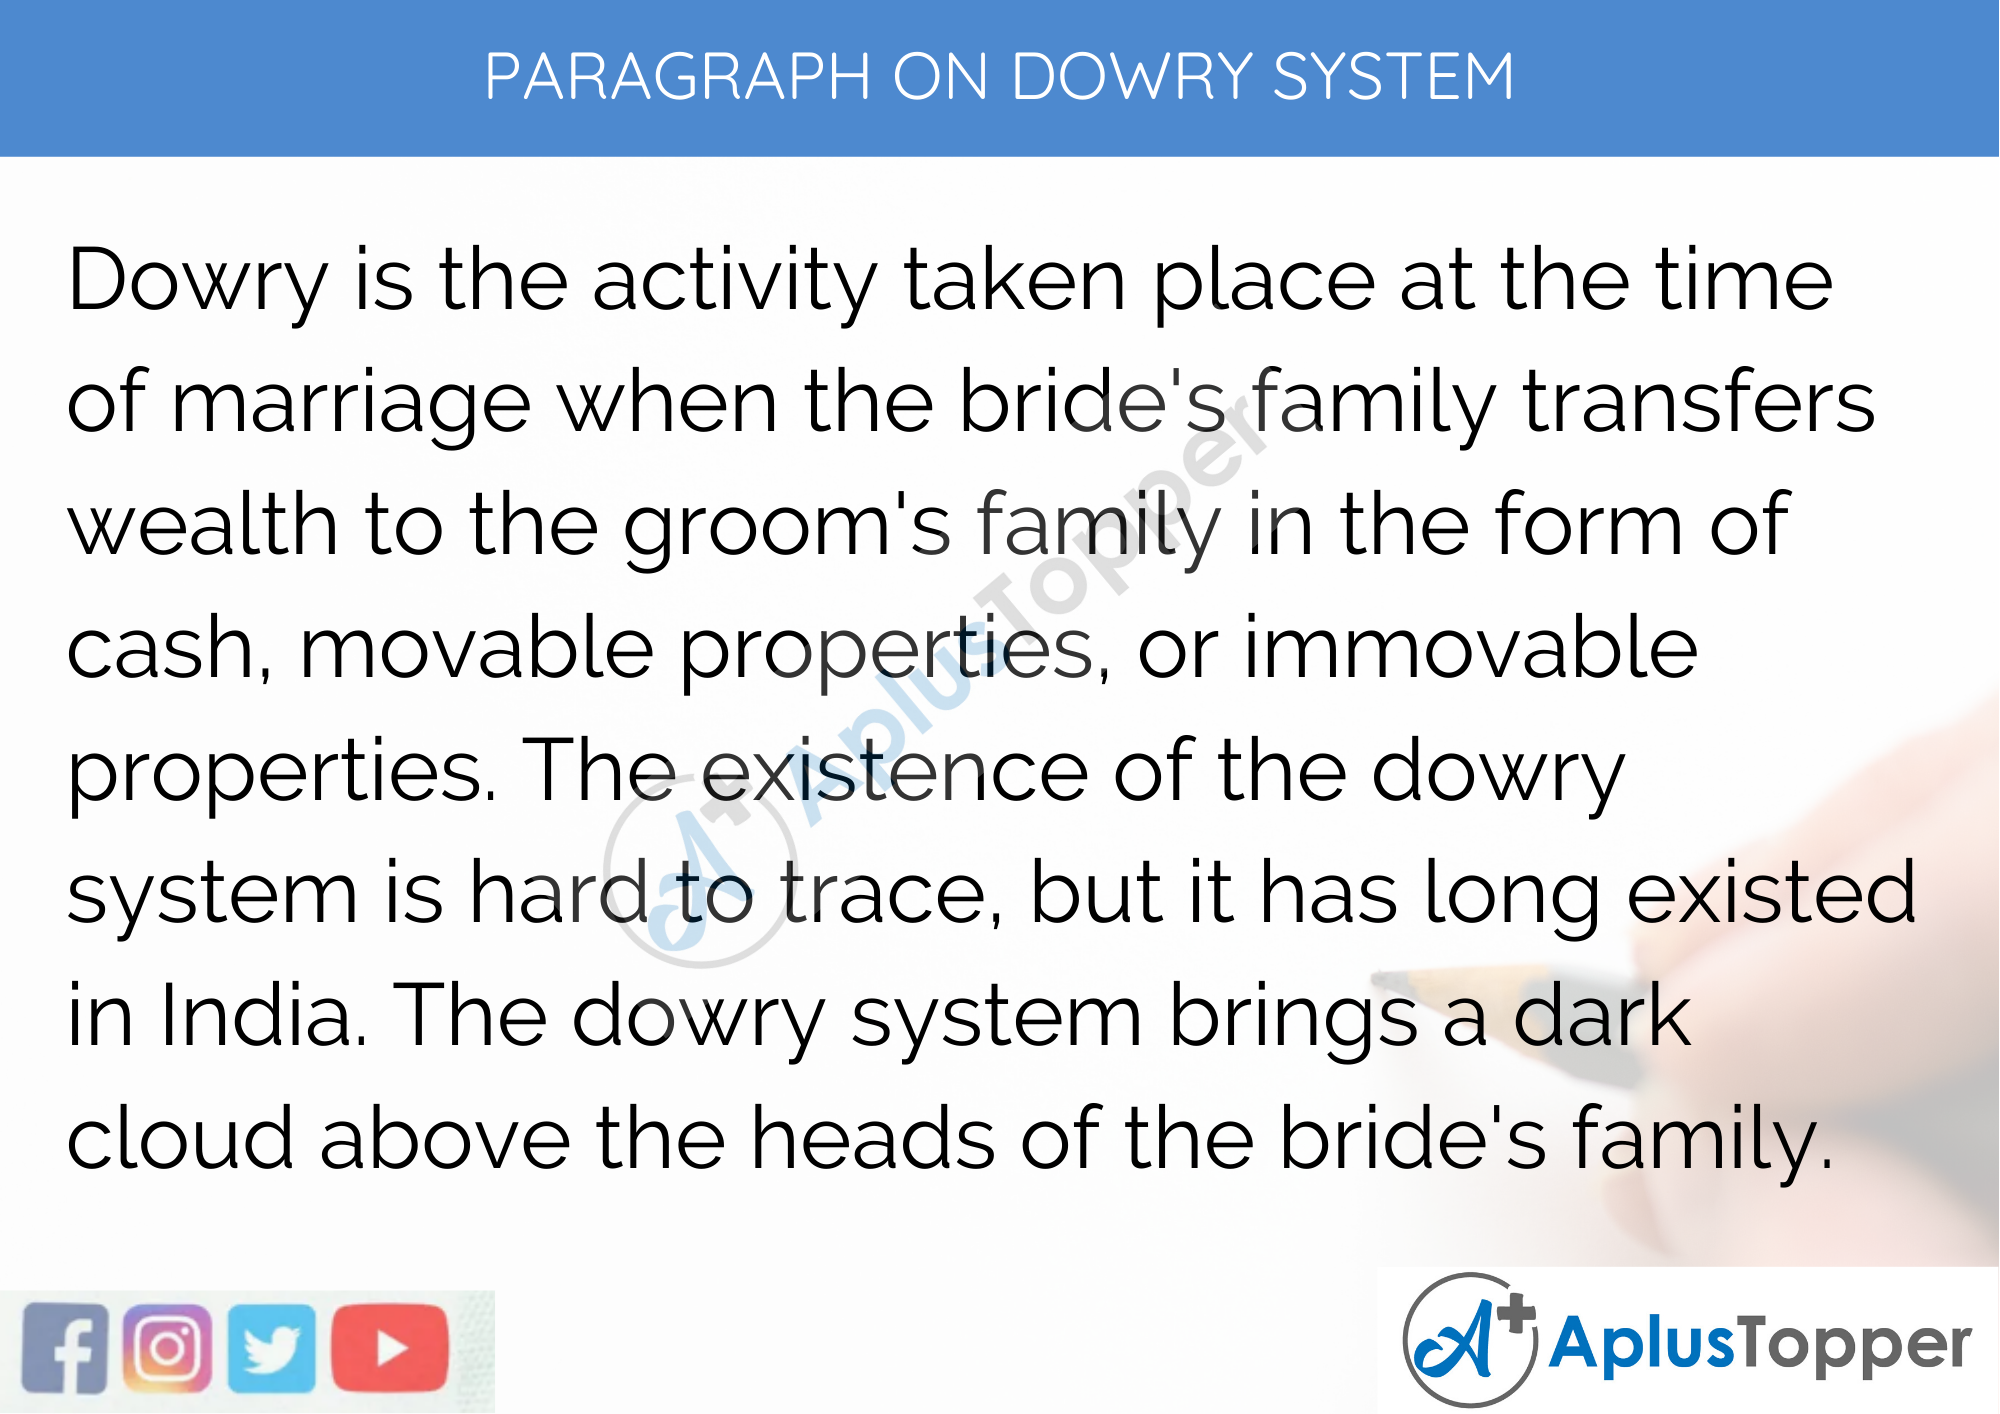 Paragraph on Dowry System - 250 to 300 Words for Classes 9, 10, 11, 12, and Competitive Exams Students